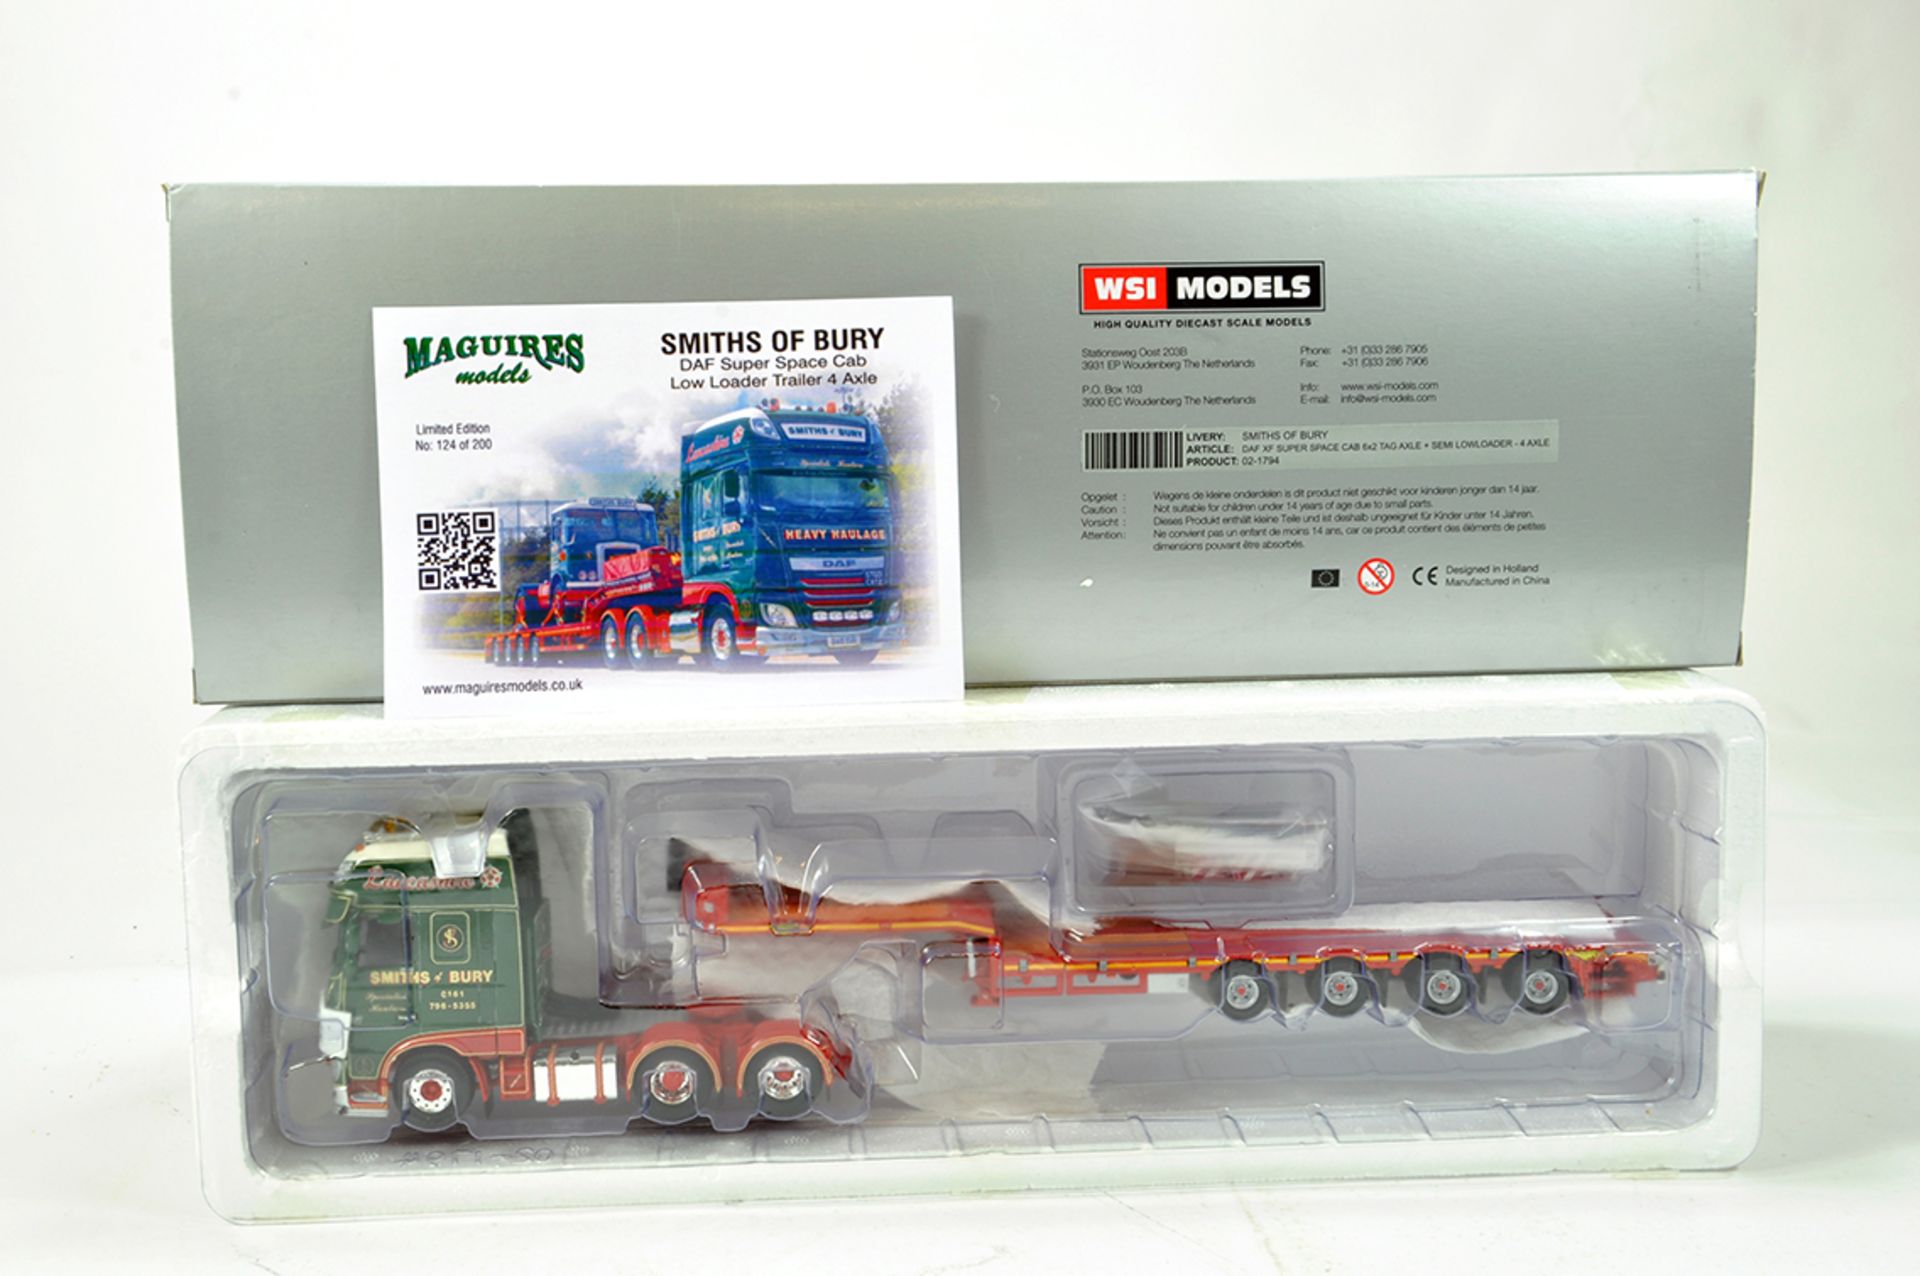 WSI 1/50 High Detail Diecast Truck Issue comprising Maguires Models DAF Super Space with Low